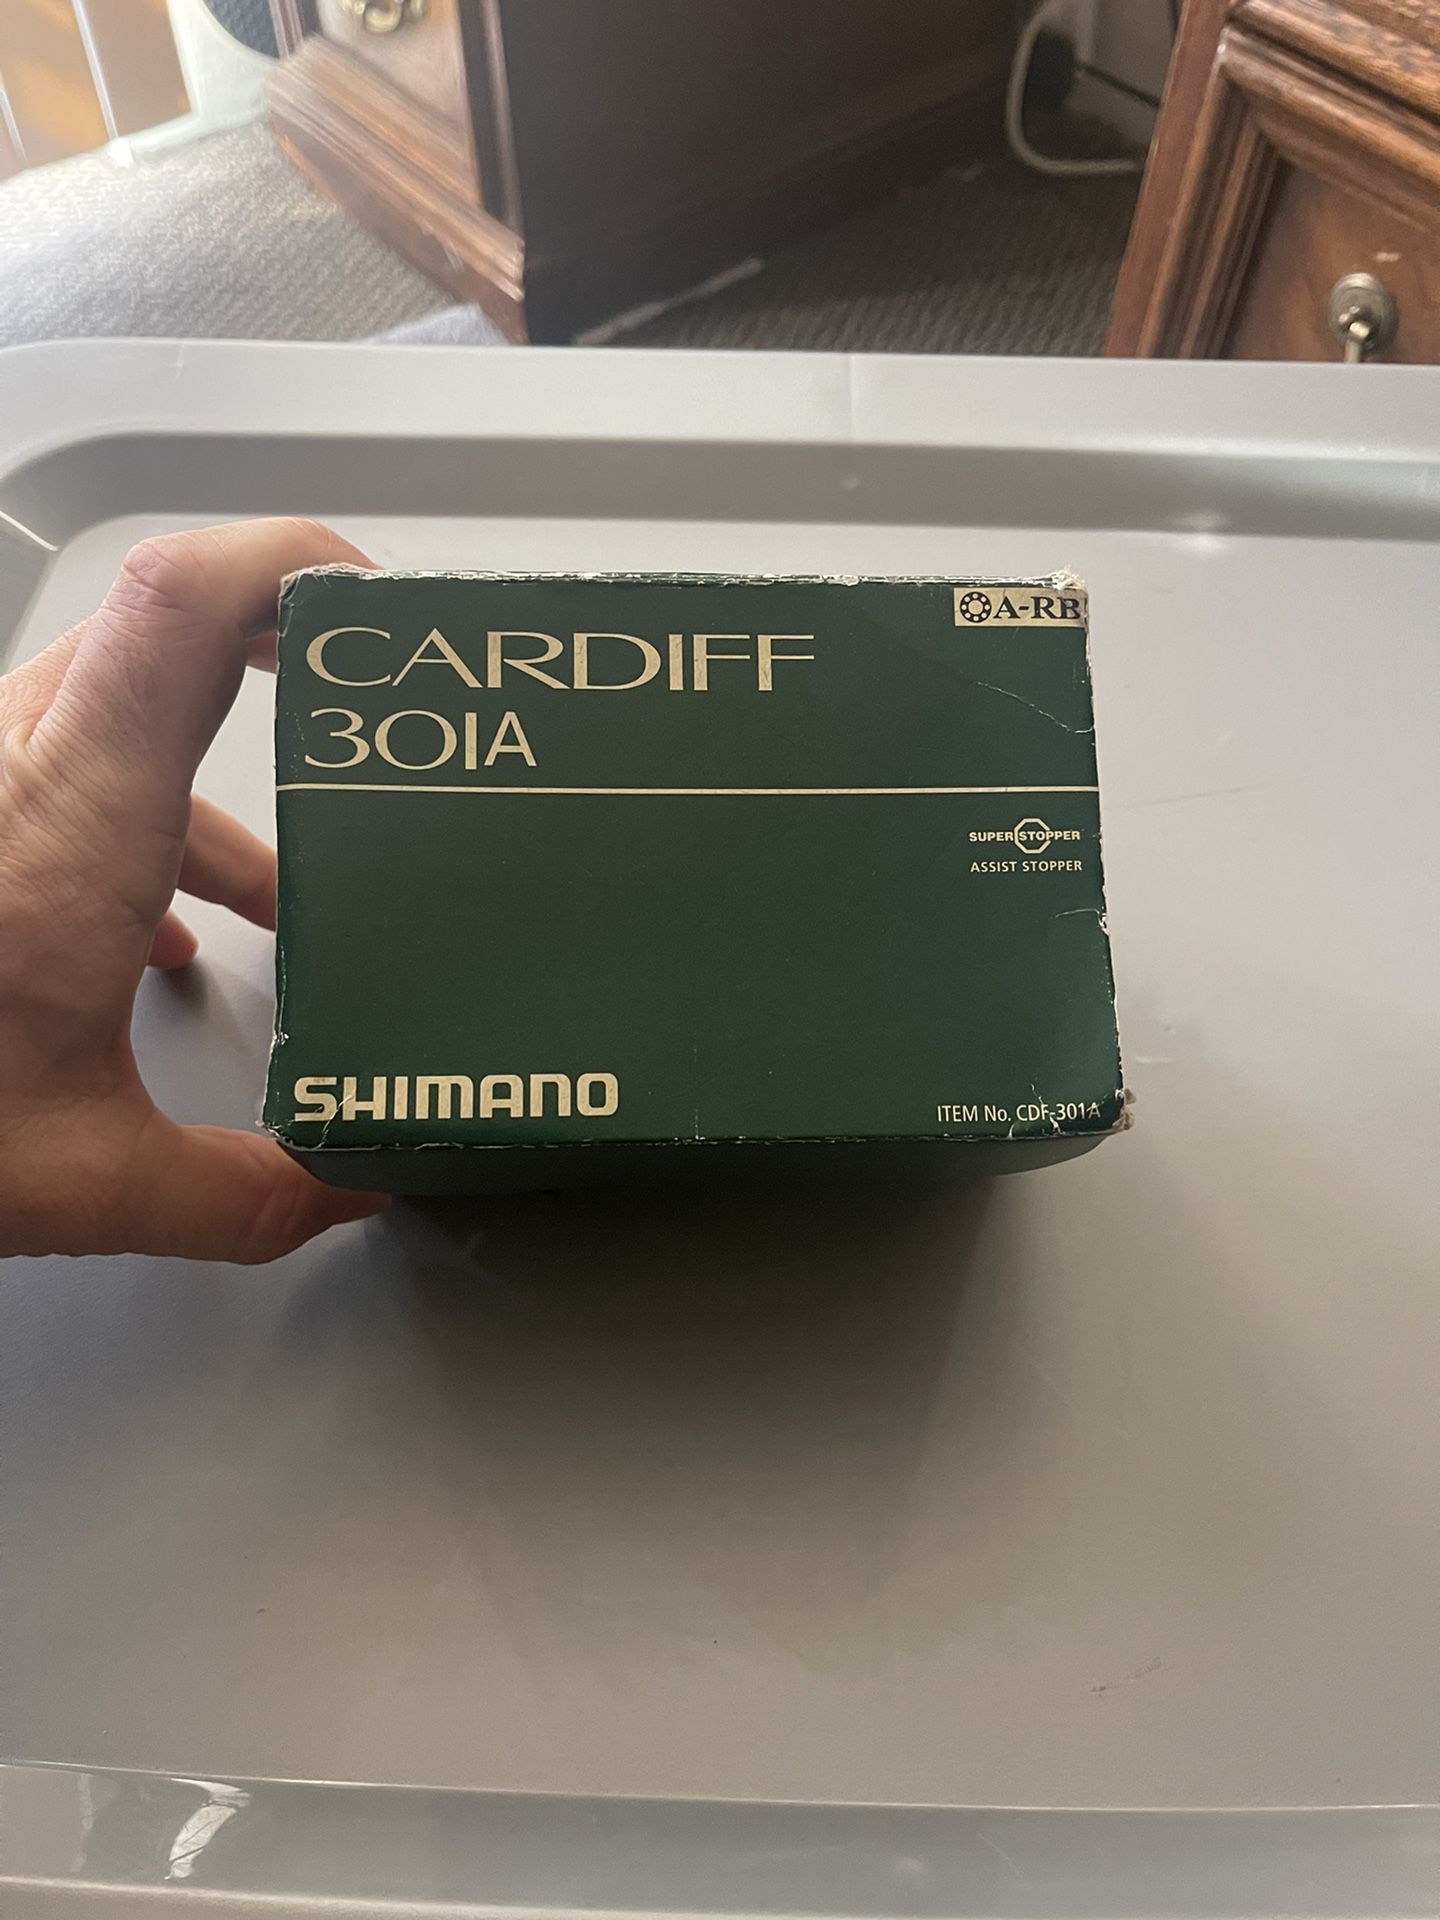 Shimano Cardiff 301A Round Reel Casting Fishing Reel